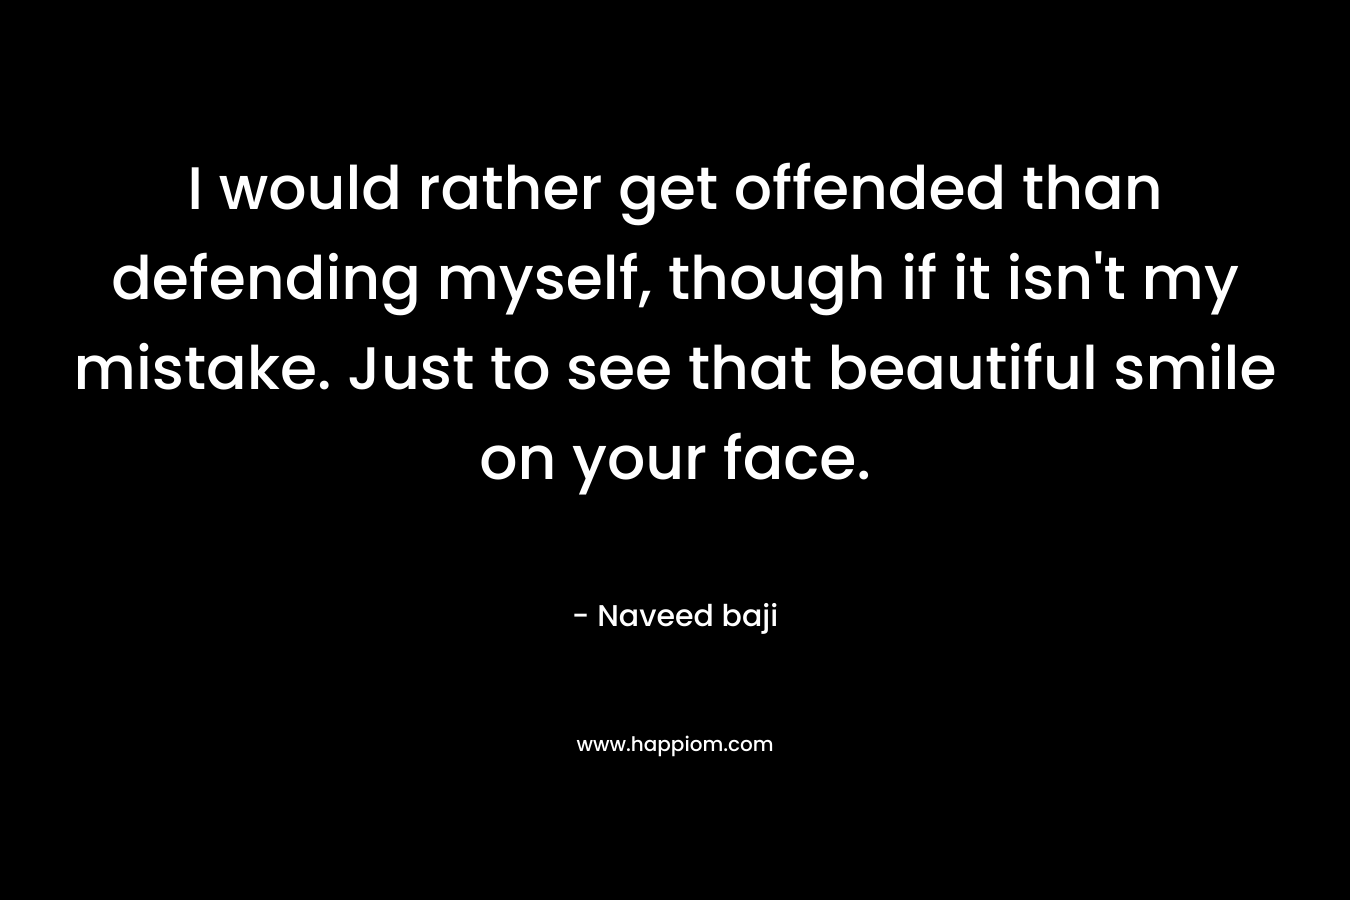 I would rather get offended than defending myself, though if it isn't my mistake. Just to see that beautiful smile on your face.